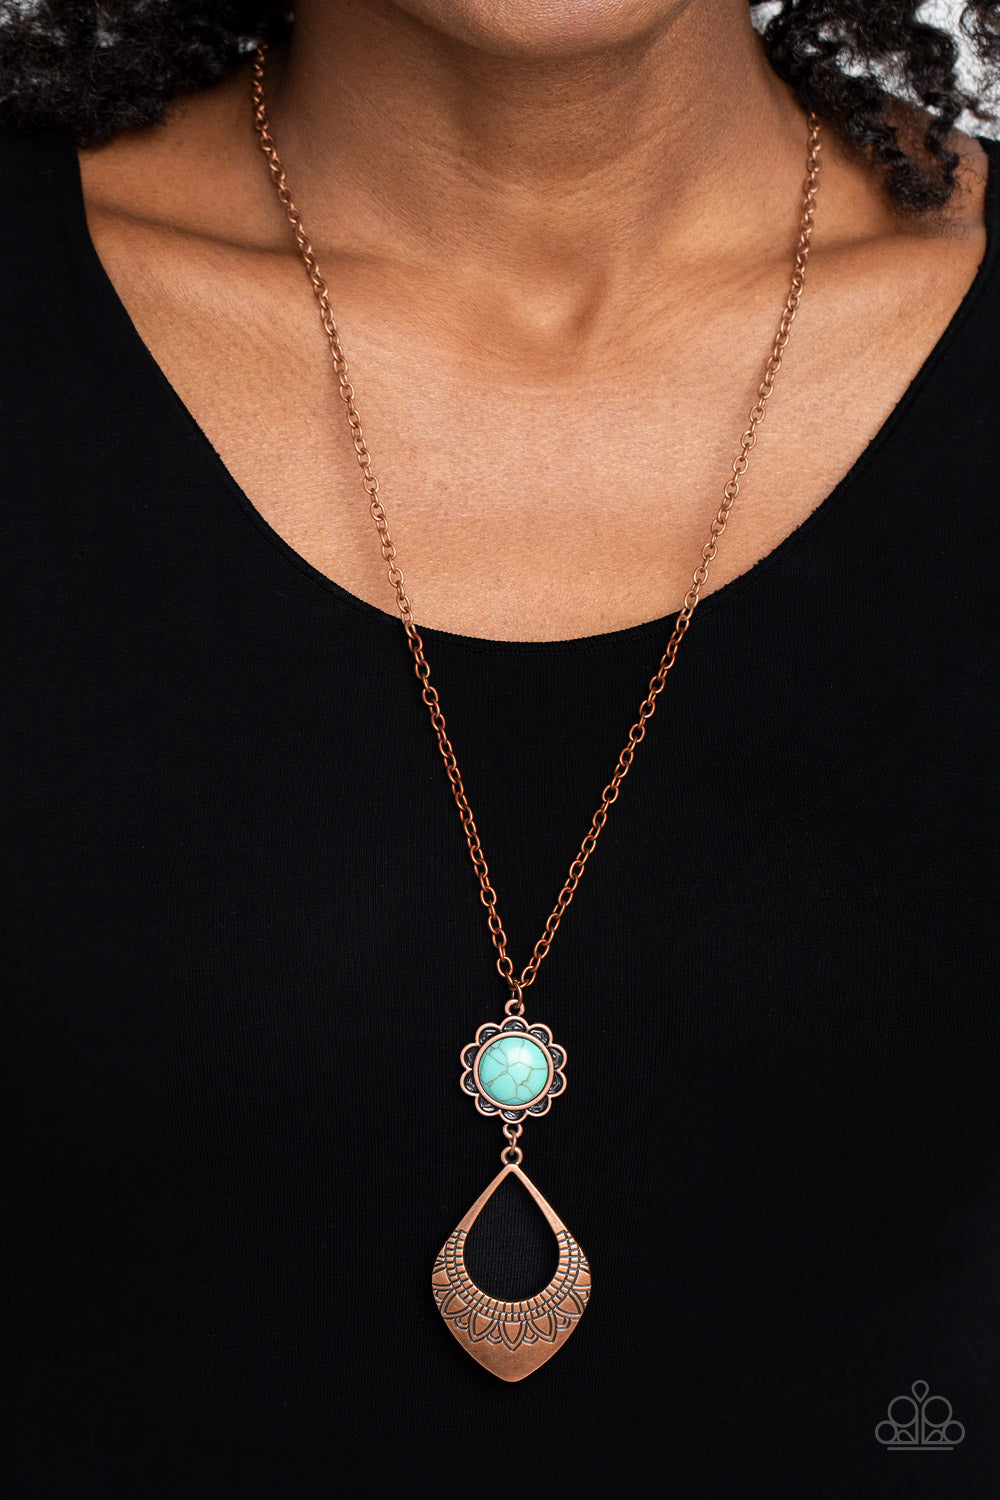 Stone TOLL - Copper with Turquoise Crackle Stone Pendant Silver Long Necklace